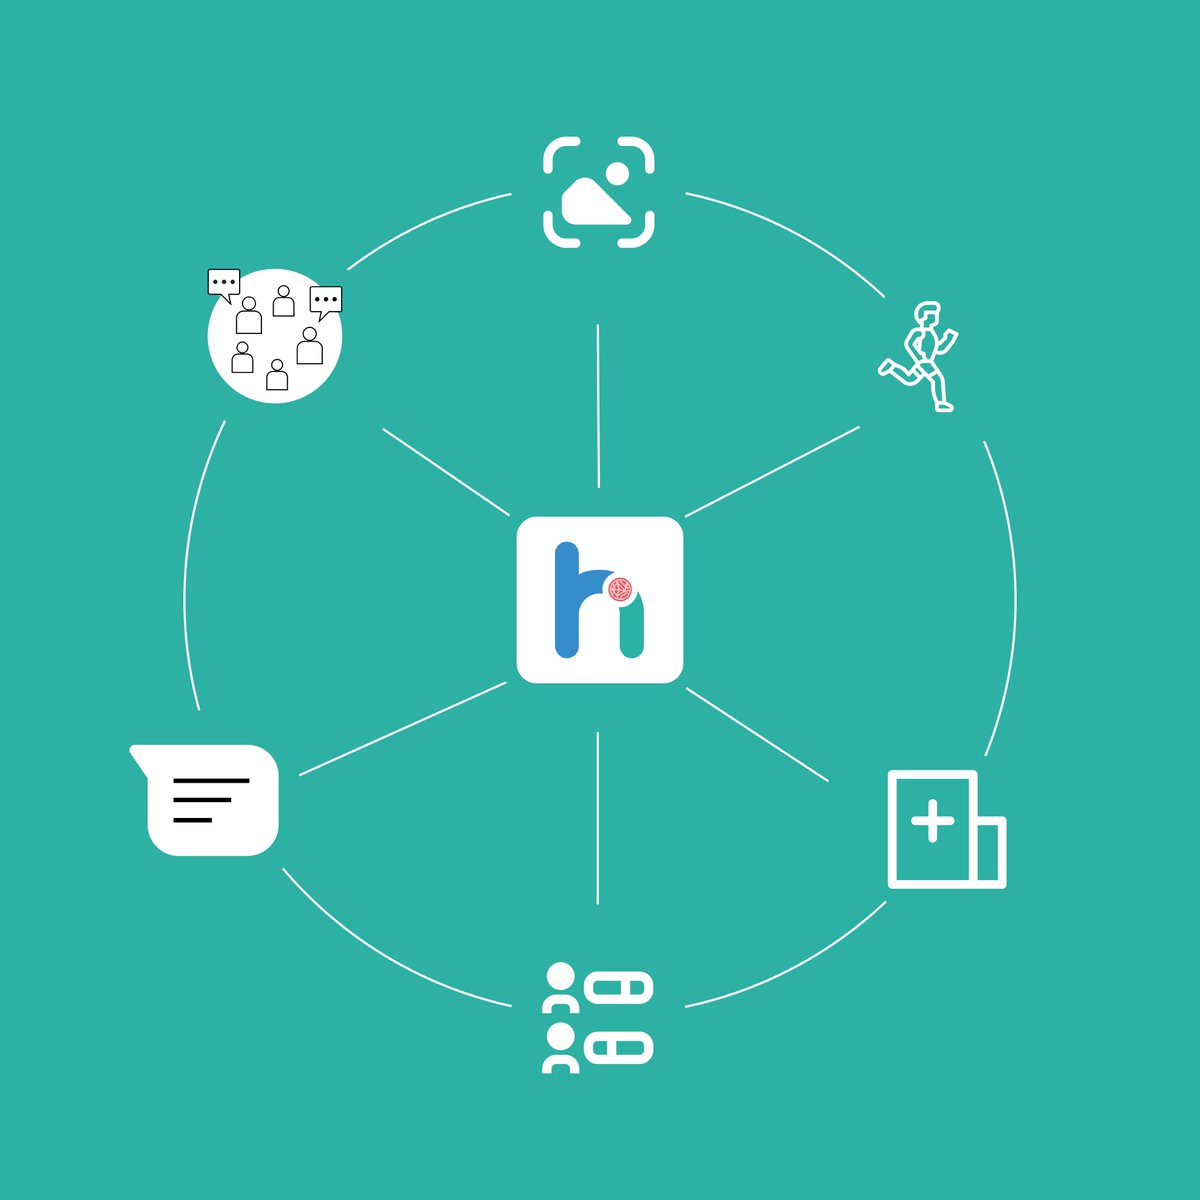 🌟 Exciting News Alert! 🌟 We're thrilled to introduce our latest feature: #HICommunity! 🚀👥

👉 What's HI Community? It's your new go-to space for #healthempowerment! #Connect with like-minded individuals, share experiences, and embark on a journey towards wellness together. 🤝